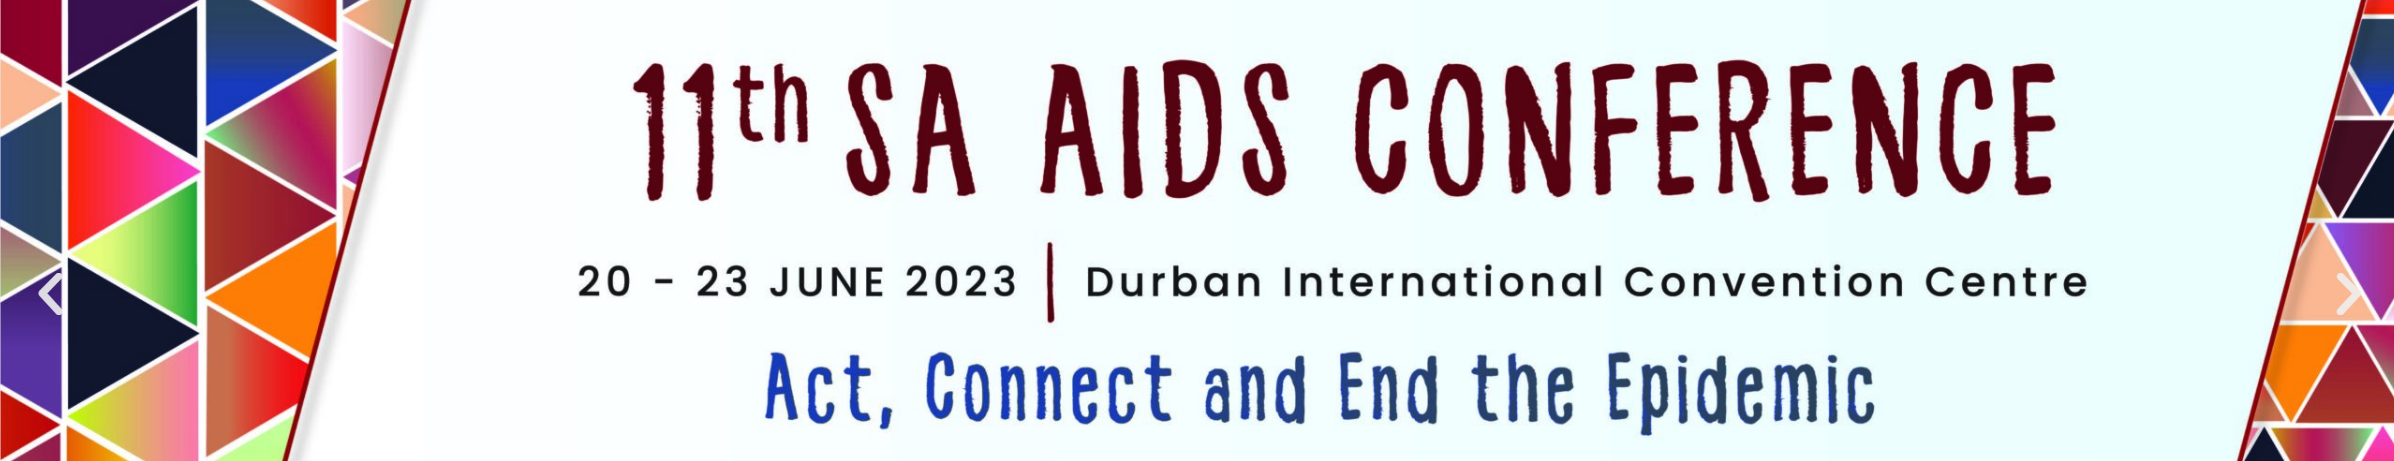 logo for 11th SA AIDS Conference 2023